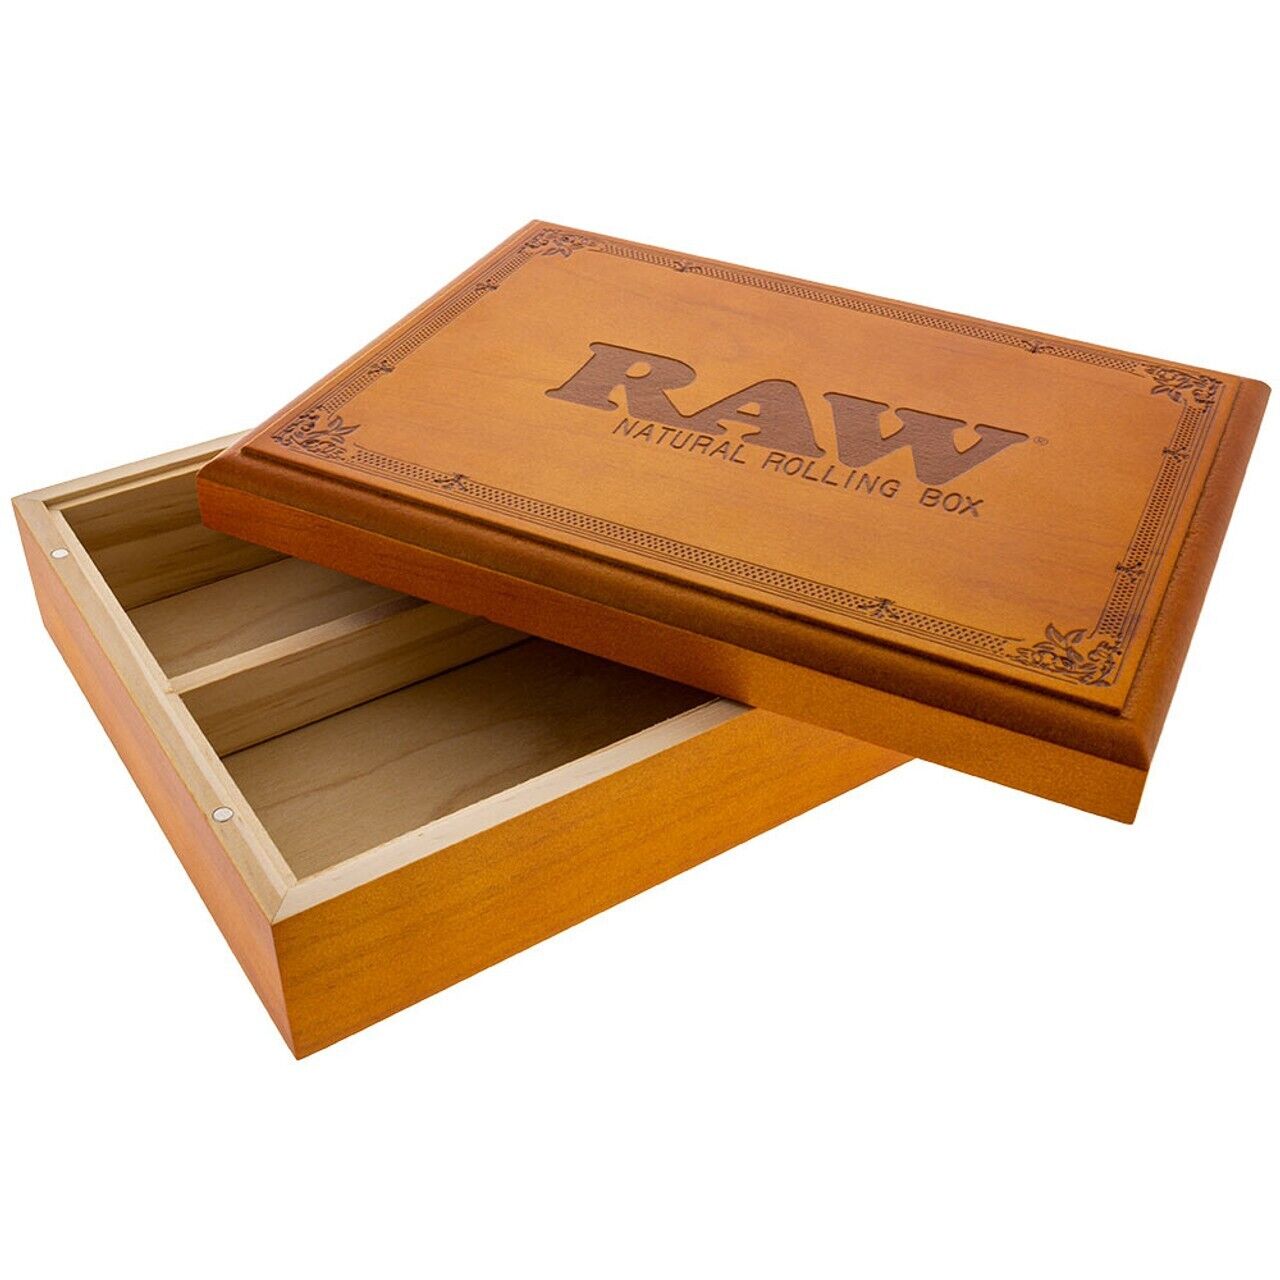 1x Box Raw Wood Box Wood Rolling Tray | Magnetic Lid NEW Discontinued Collectors